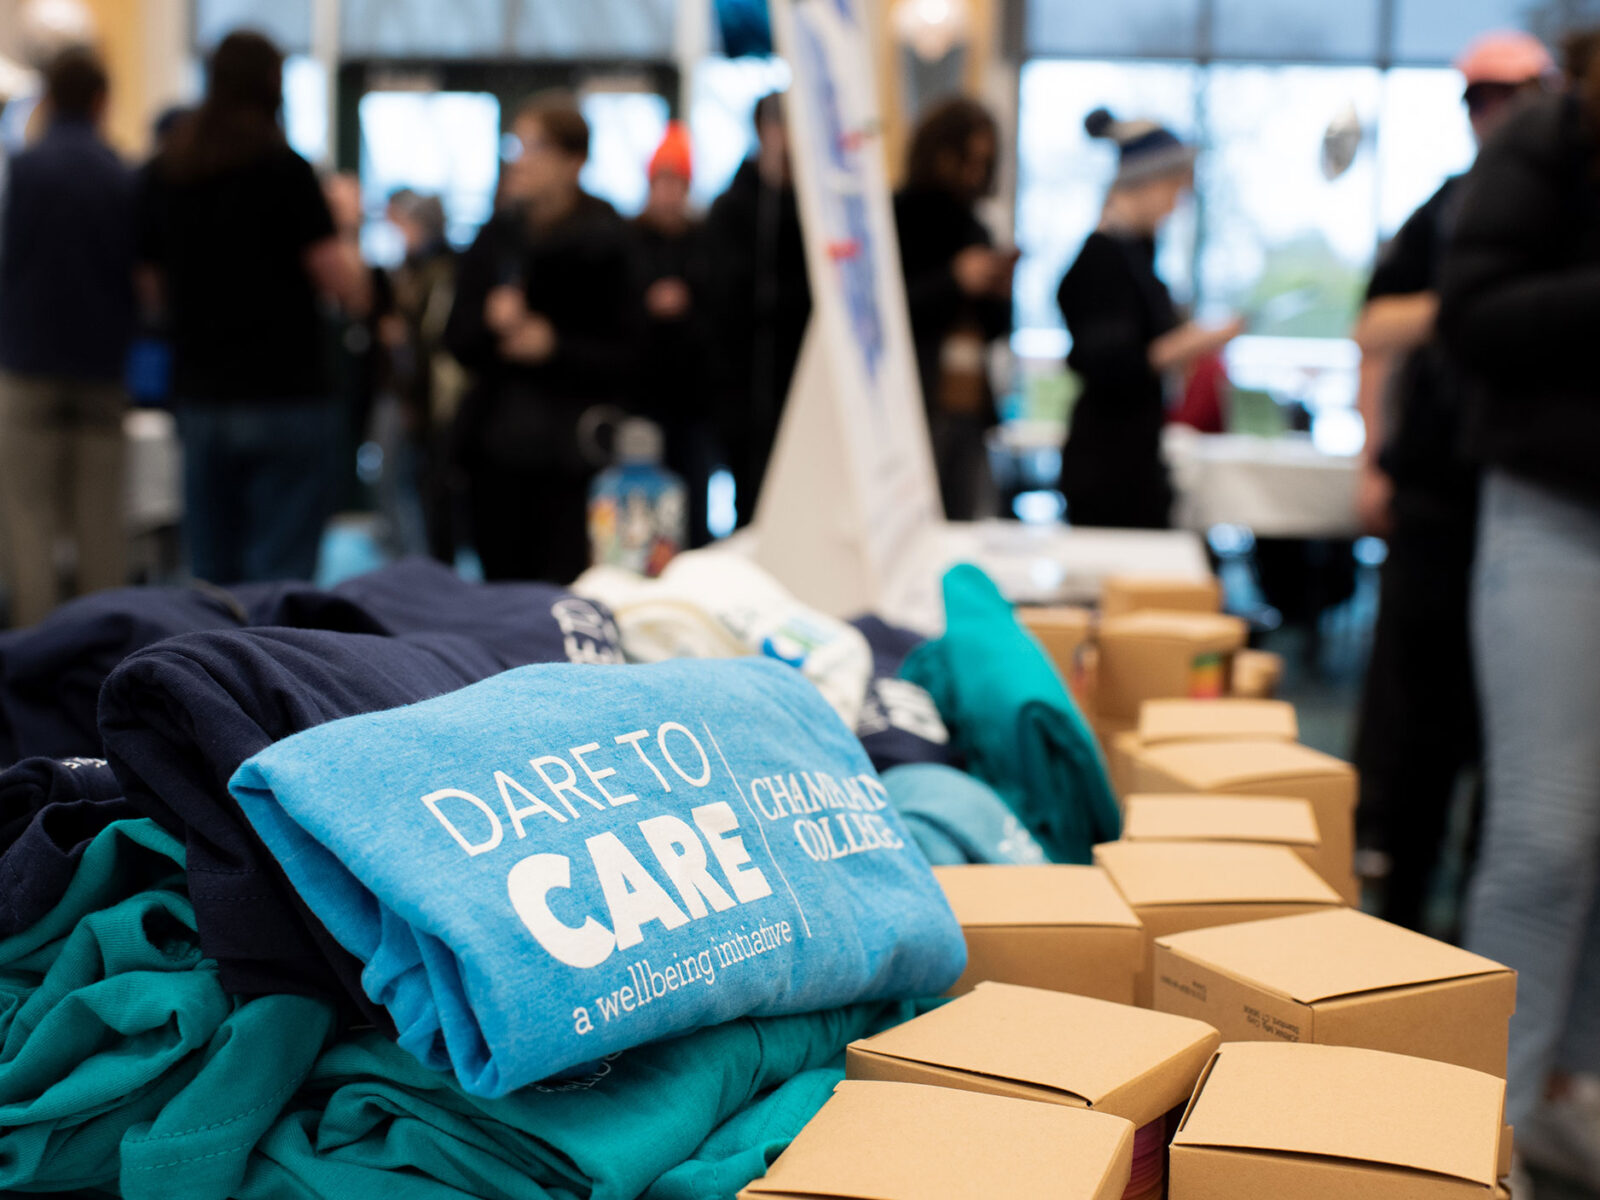 a blue tshirt that reads "dare to care a wellbeing initiative" sits atop boxes and a pile of tshirts